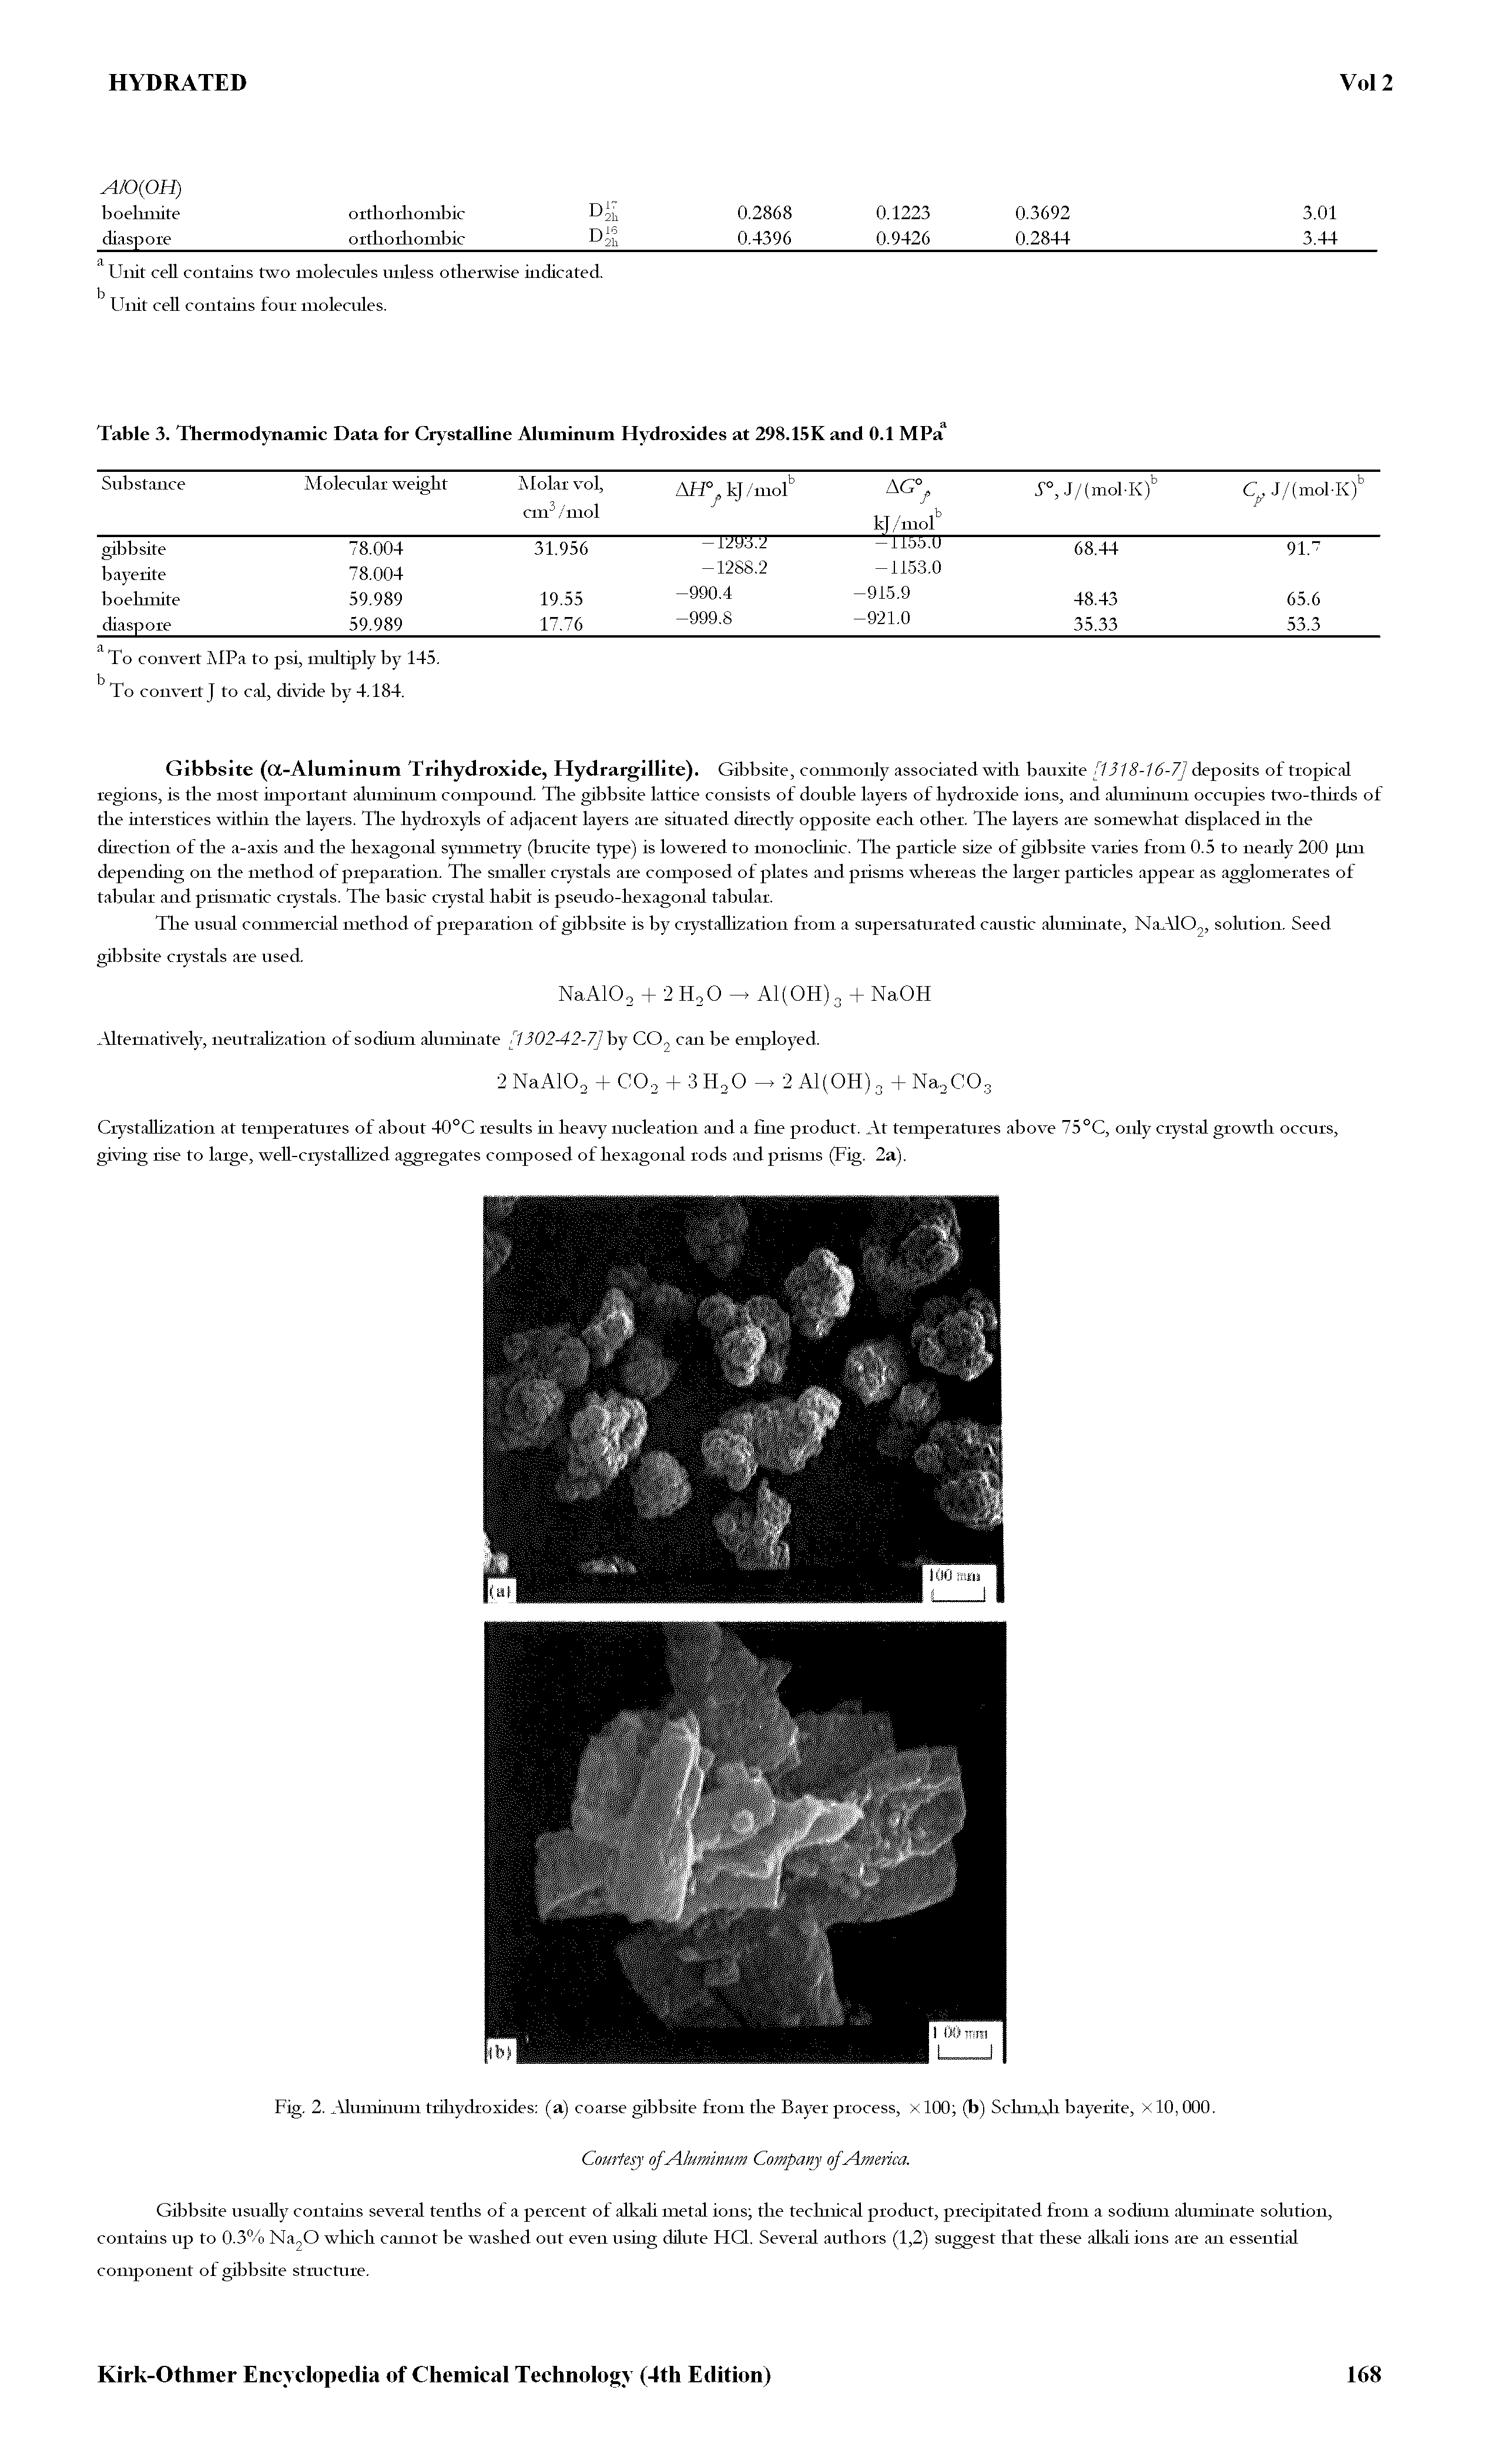 Fig. 2. Aluminum tiiliydroxides (a) coarse gibbsite from the Bayer process, x 100 (b) Schm h bayerite, x 10, 000.